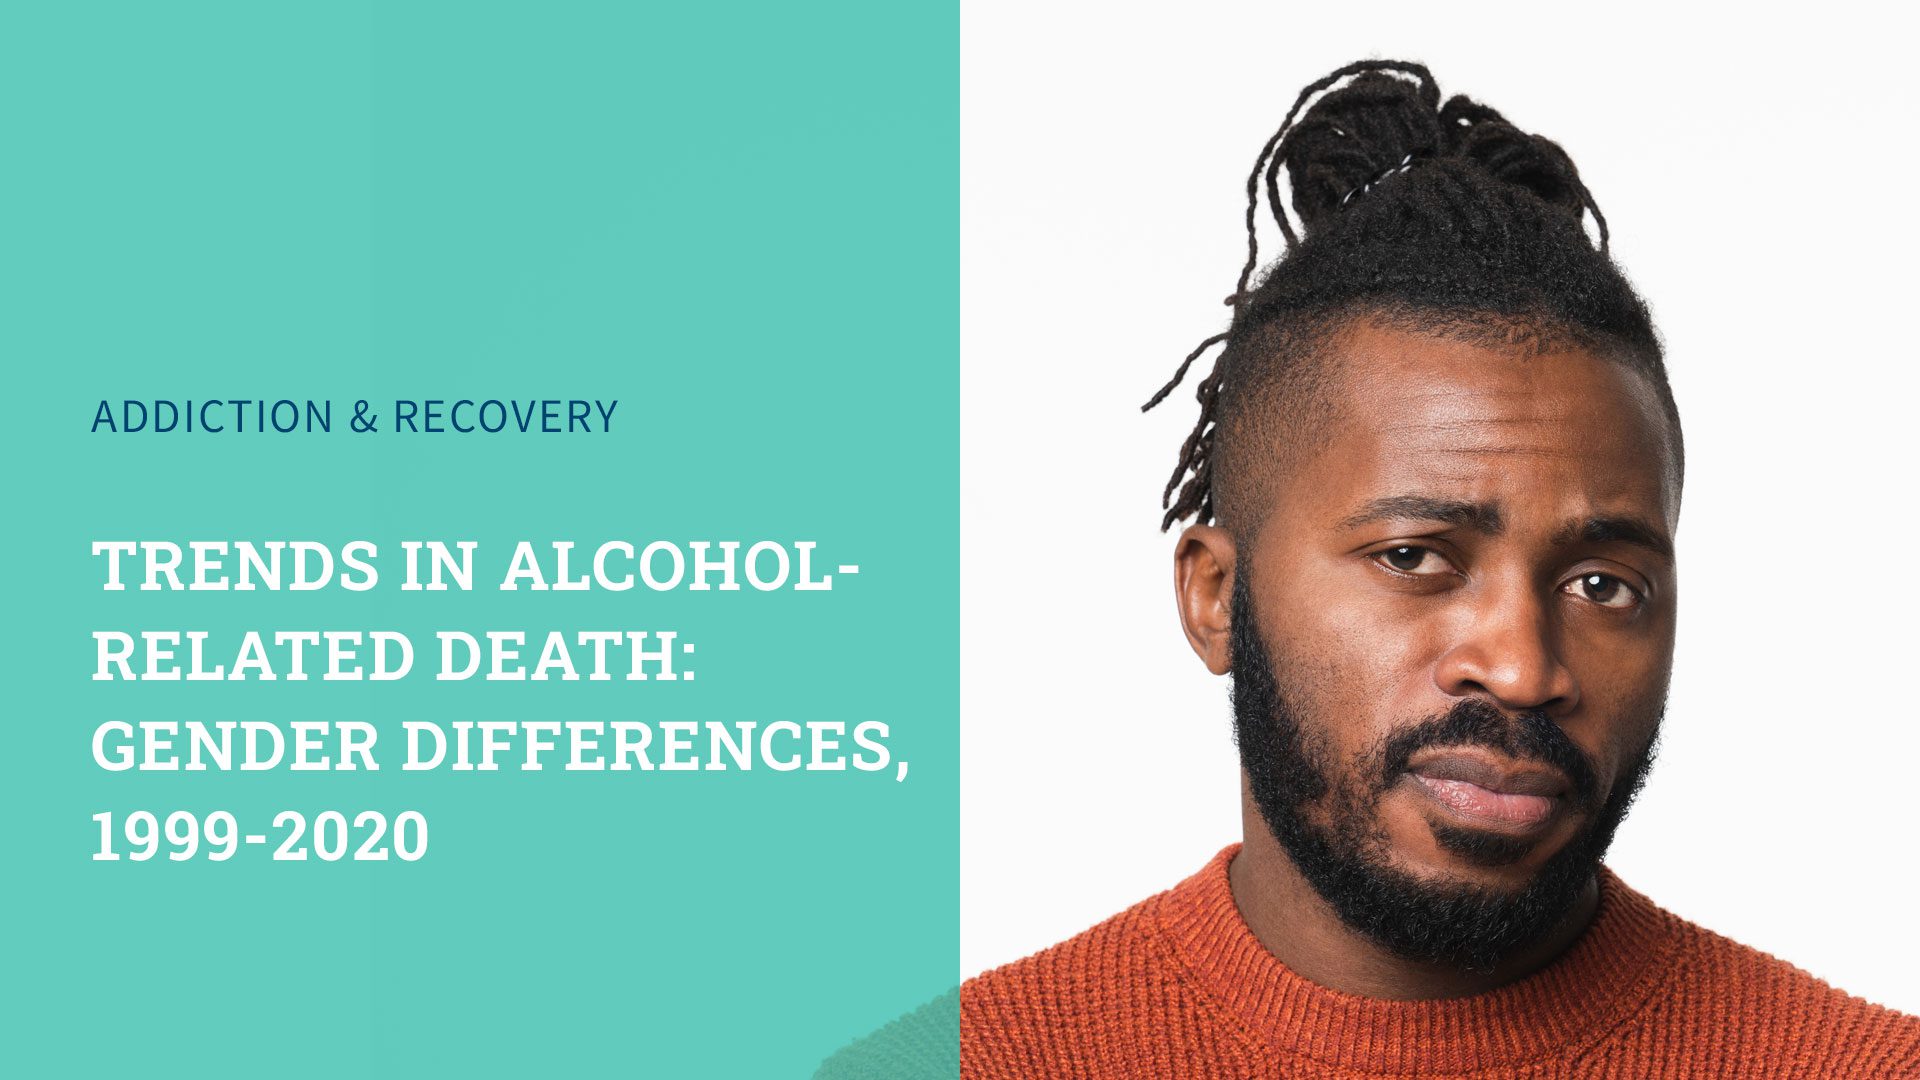 Gender Differences in Alcohol-Related Deaths